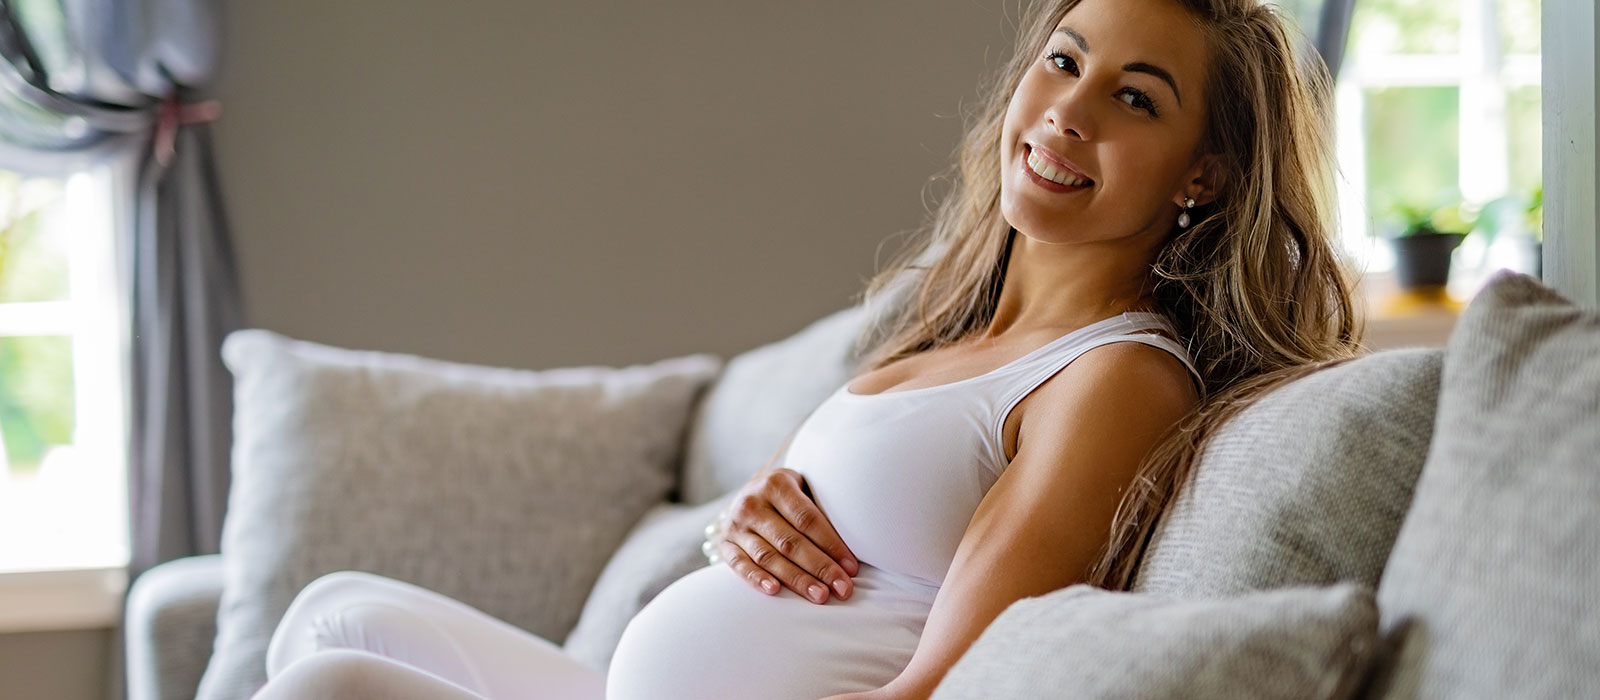 Should You Get Vaccinations During Pregnancy? | Women's Healthcare